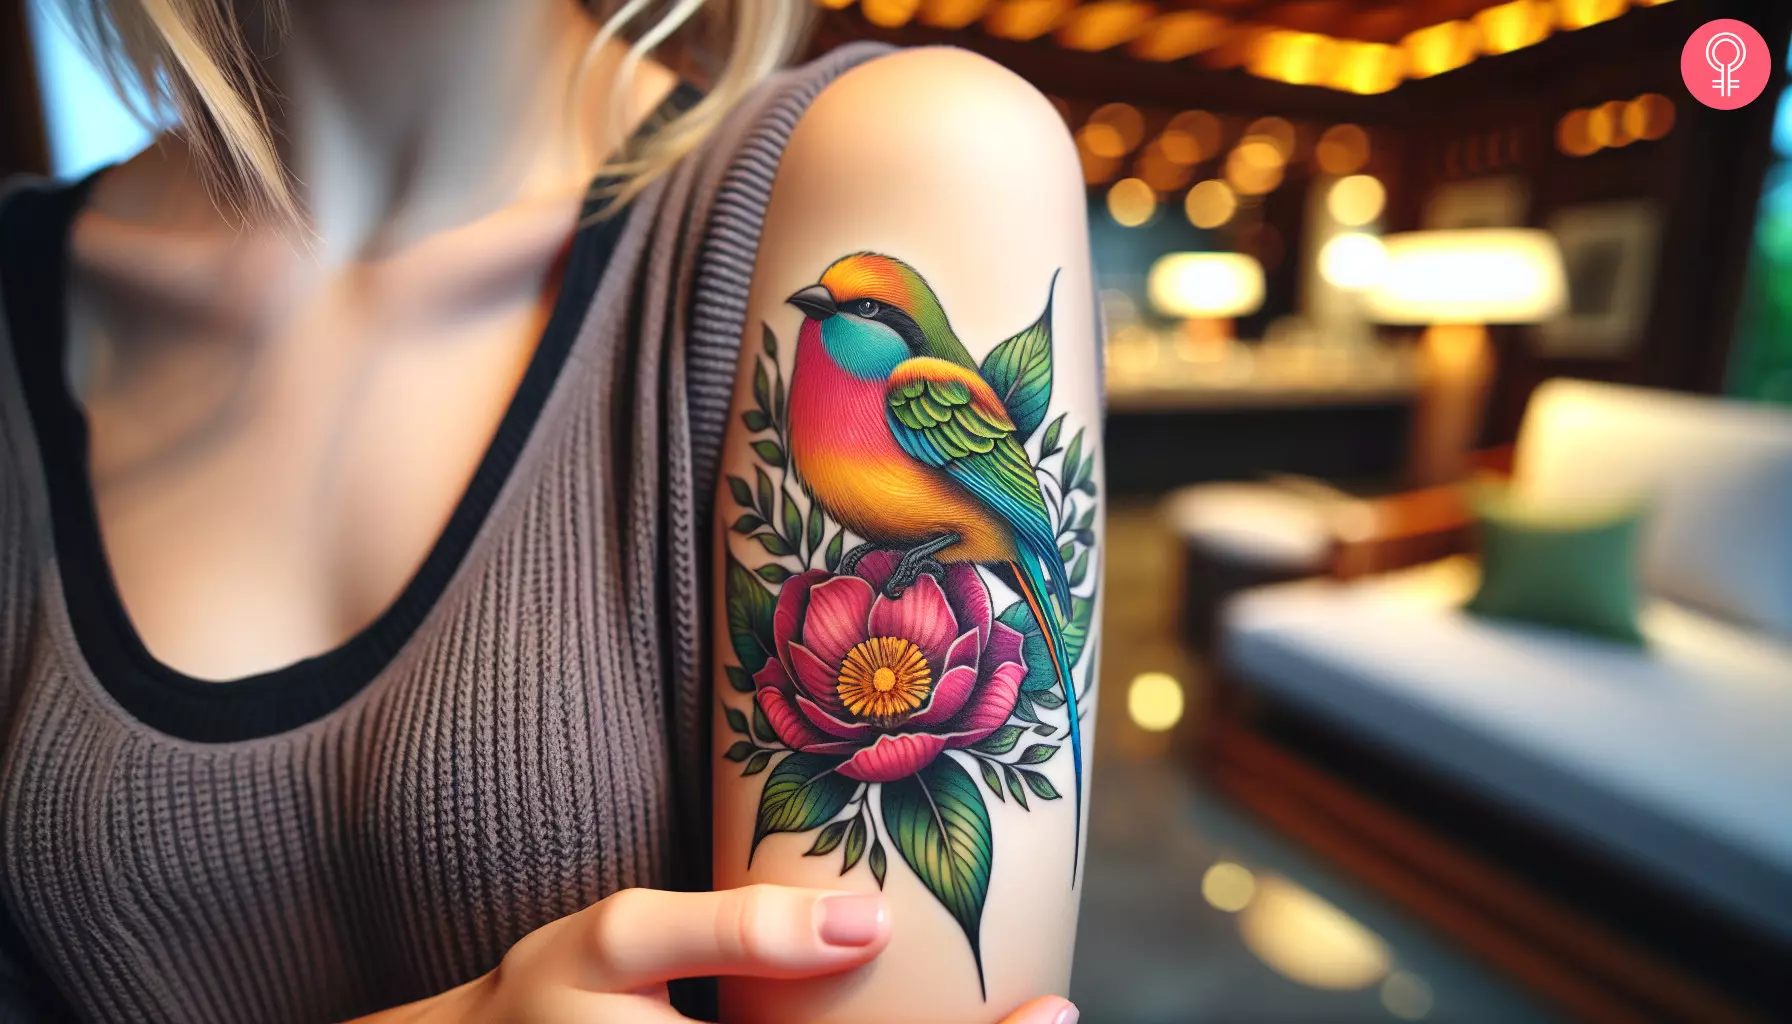 Tattoo on the arm of a woman featuring a vibrant bird perched on a flower